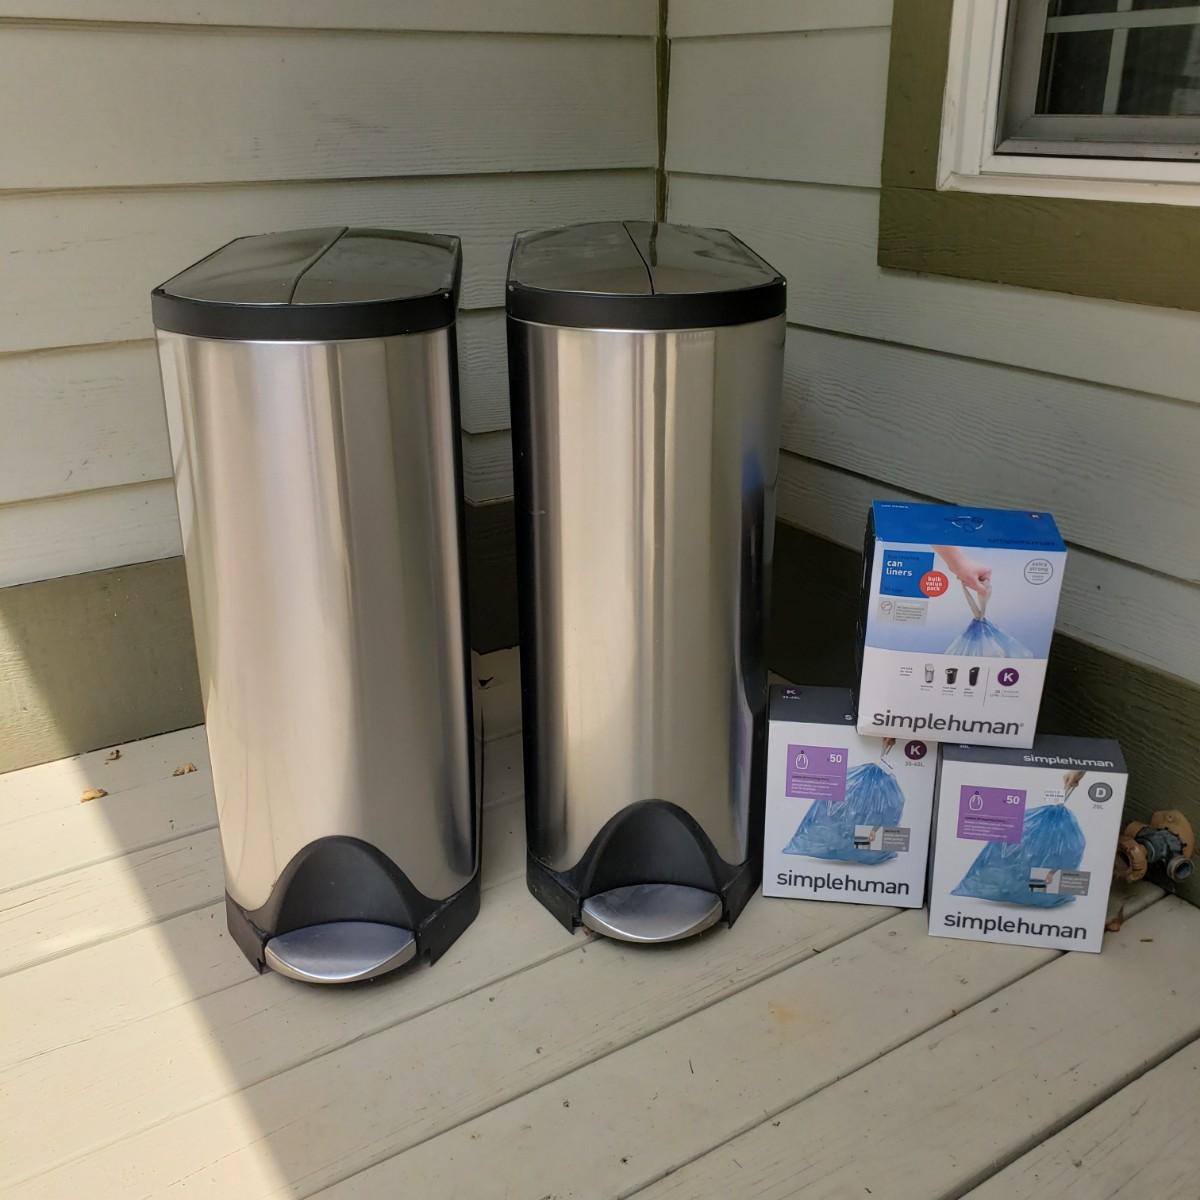 Two Simplehuman Garbage and Recycling Bins (G-KD) | EstateSales.org